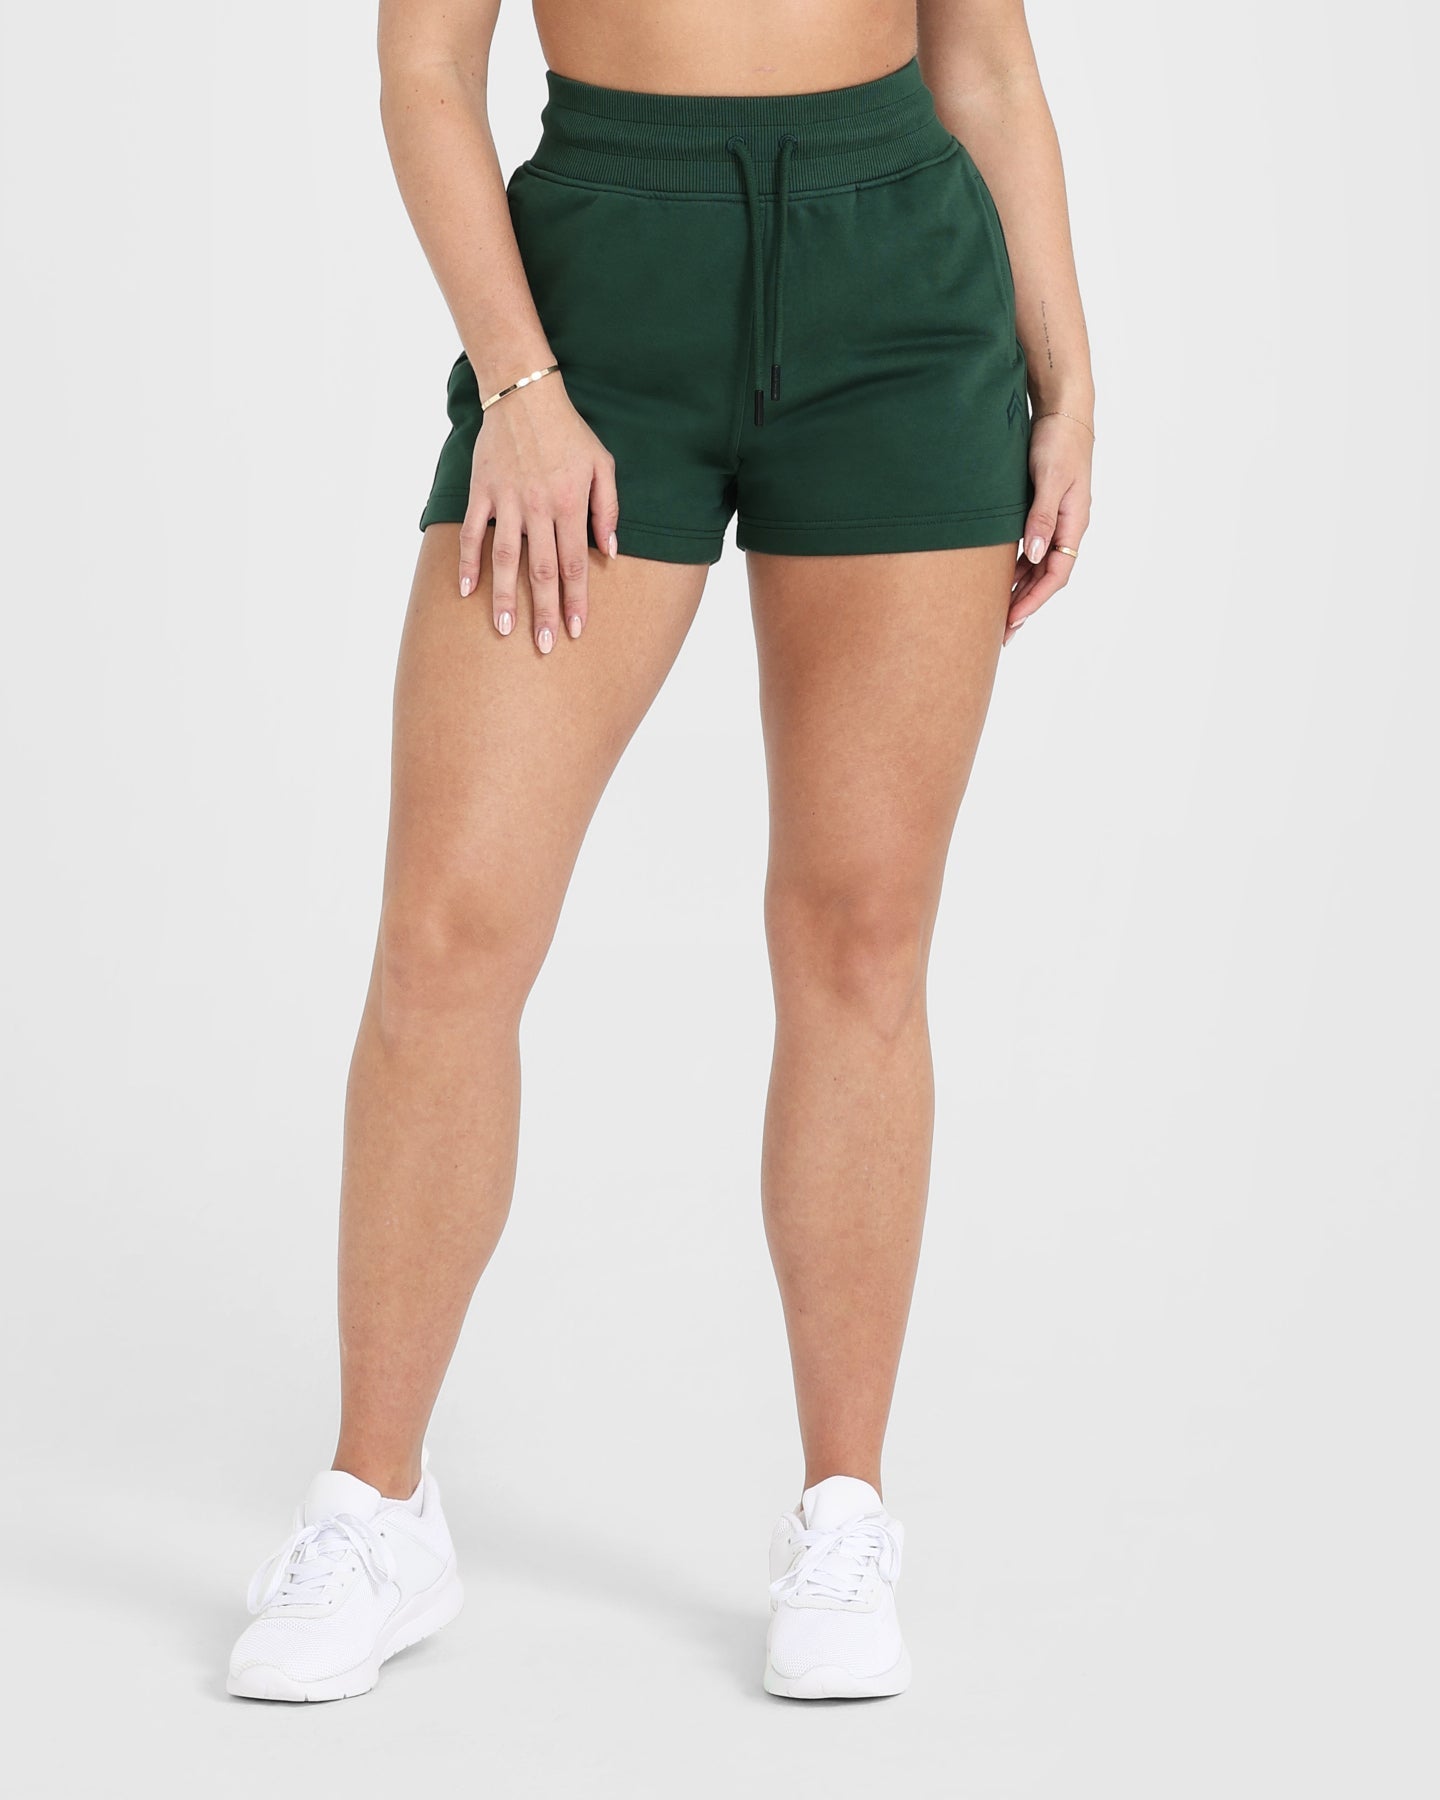 Soft Cotton Shorts Women\'s in Evergreen | Oner Active